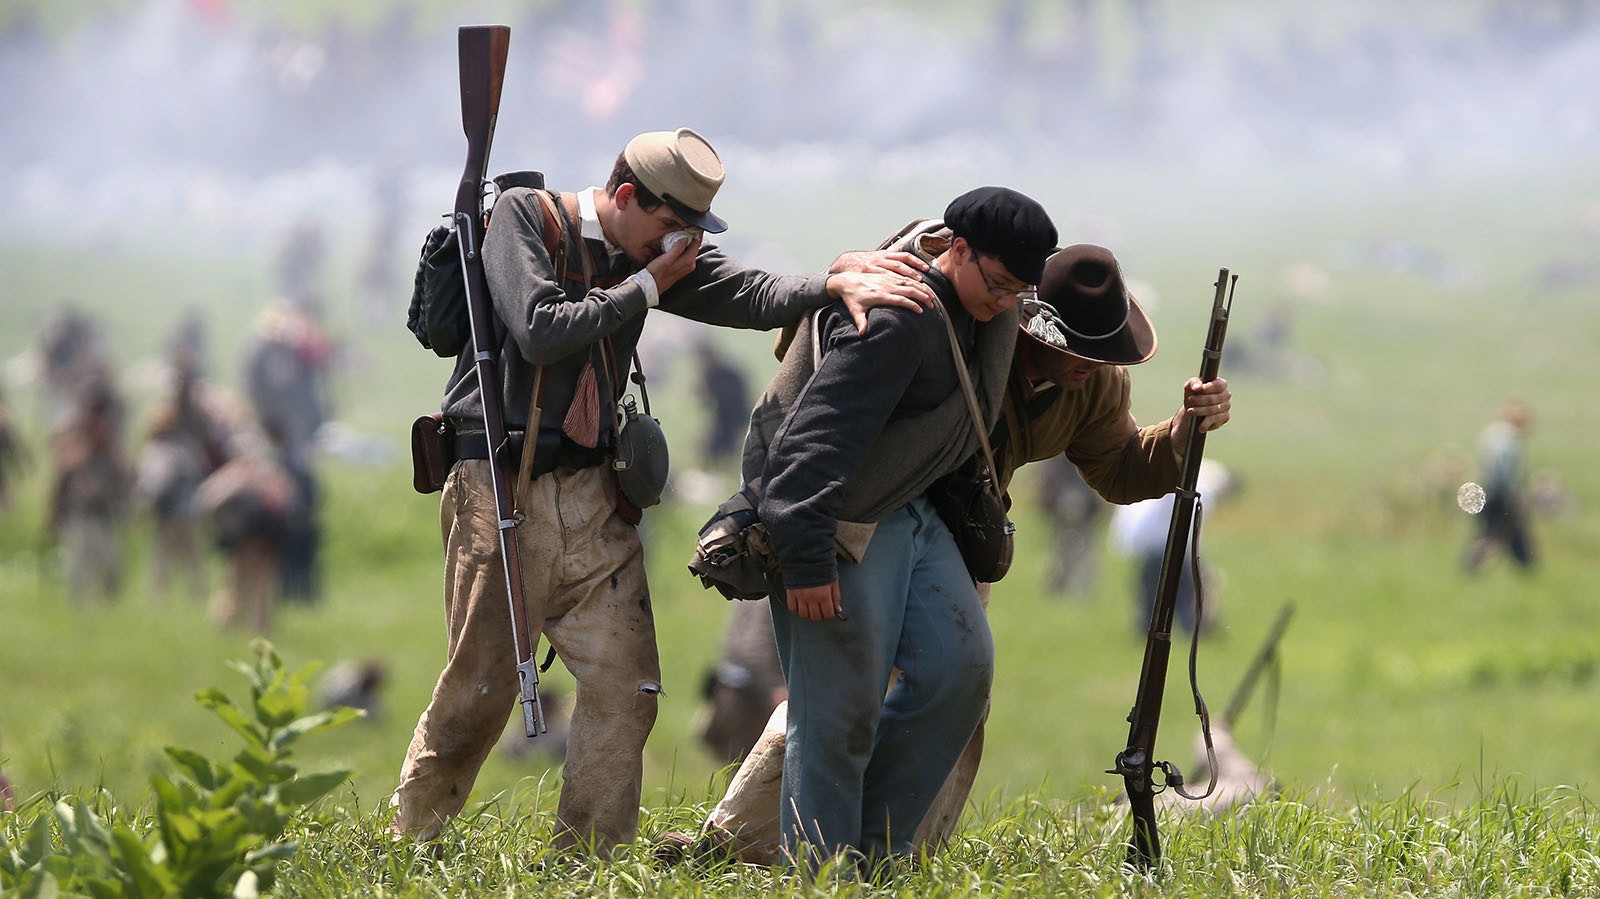 The Civil War remains one of the focal points of American history, inspiring academic and amateur researchers to compile information and reenact important battle and events of the time.